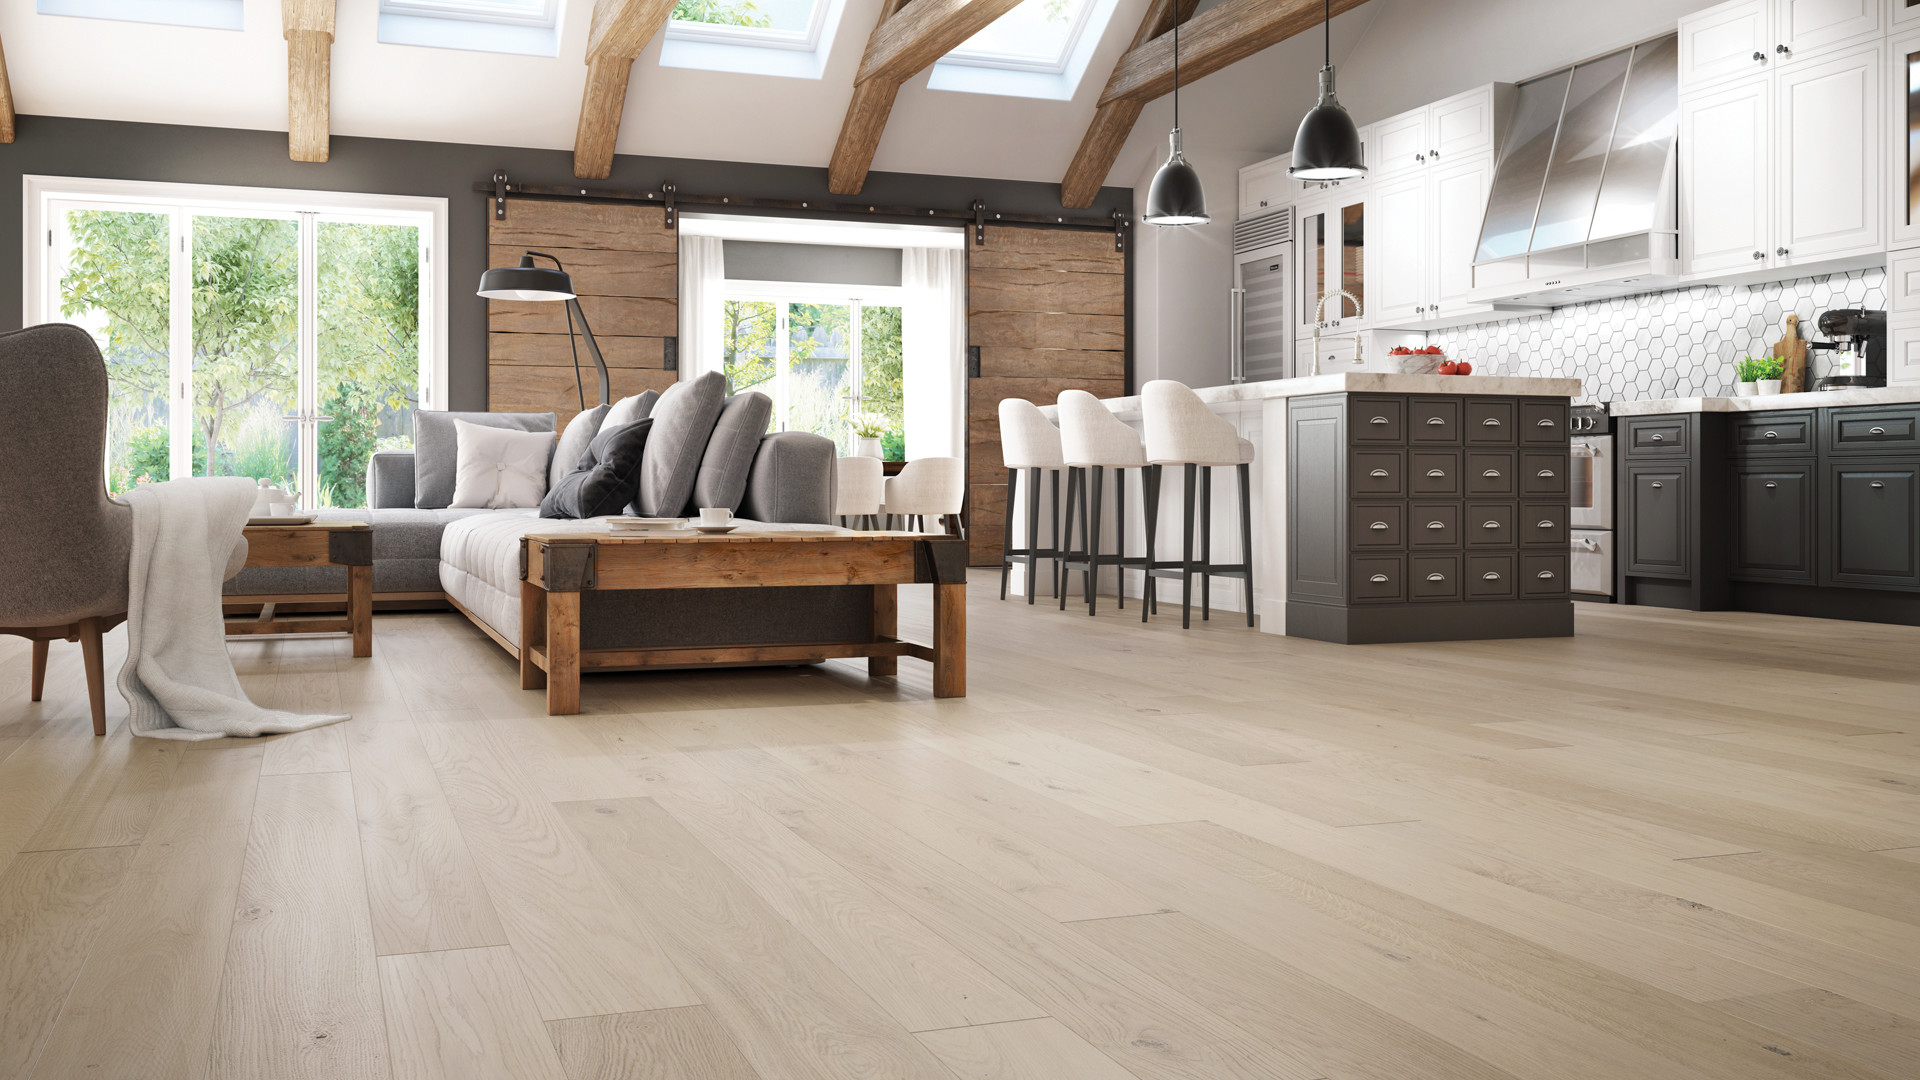 26 Famous Hardwood Flooring On Concrete Slab 2024 free download hardwood flooring on concrete slab of 4 latest hardwood flooring trends of 2018 lauzon flooring intended for this technology brings your hardwood floors and well being to a new level by impr